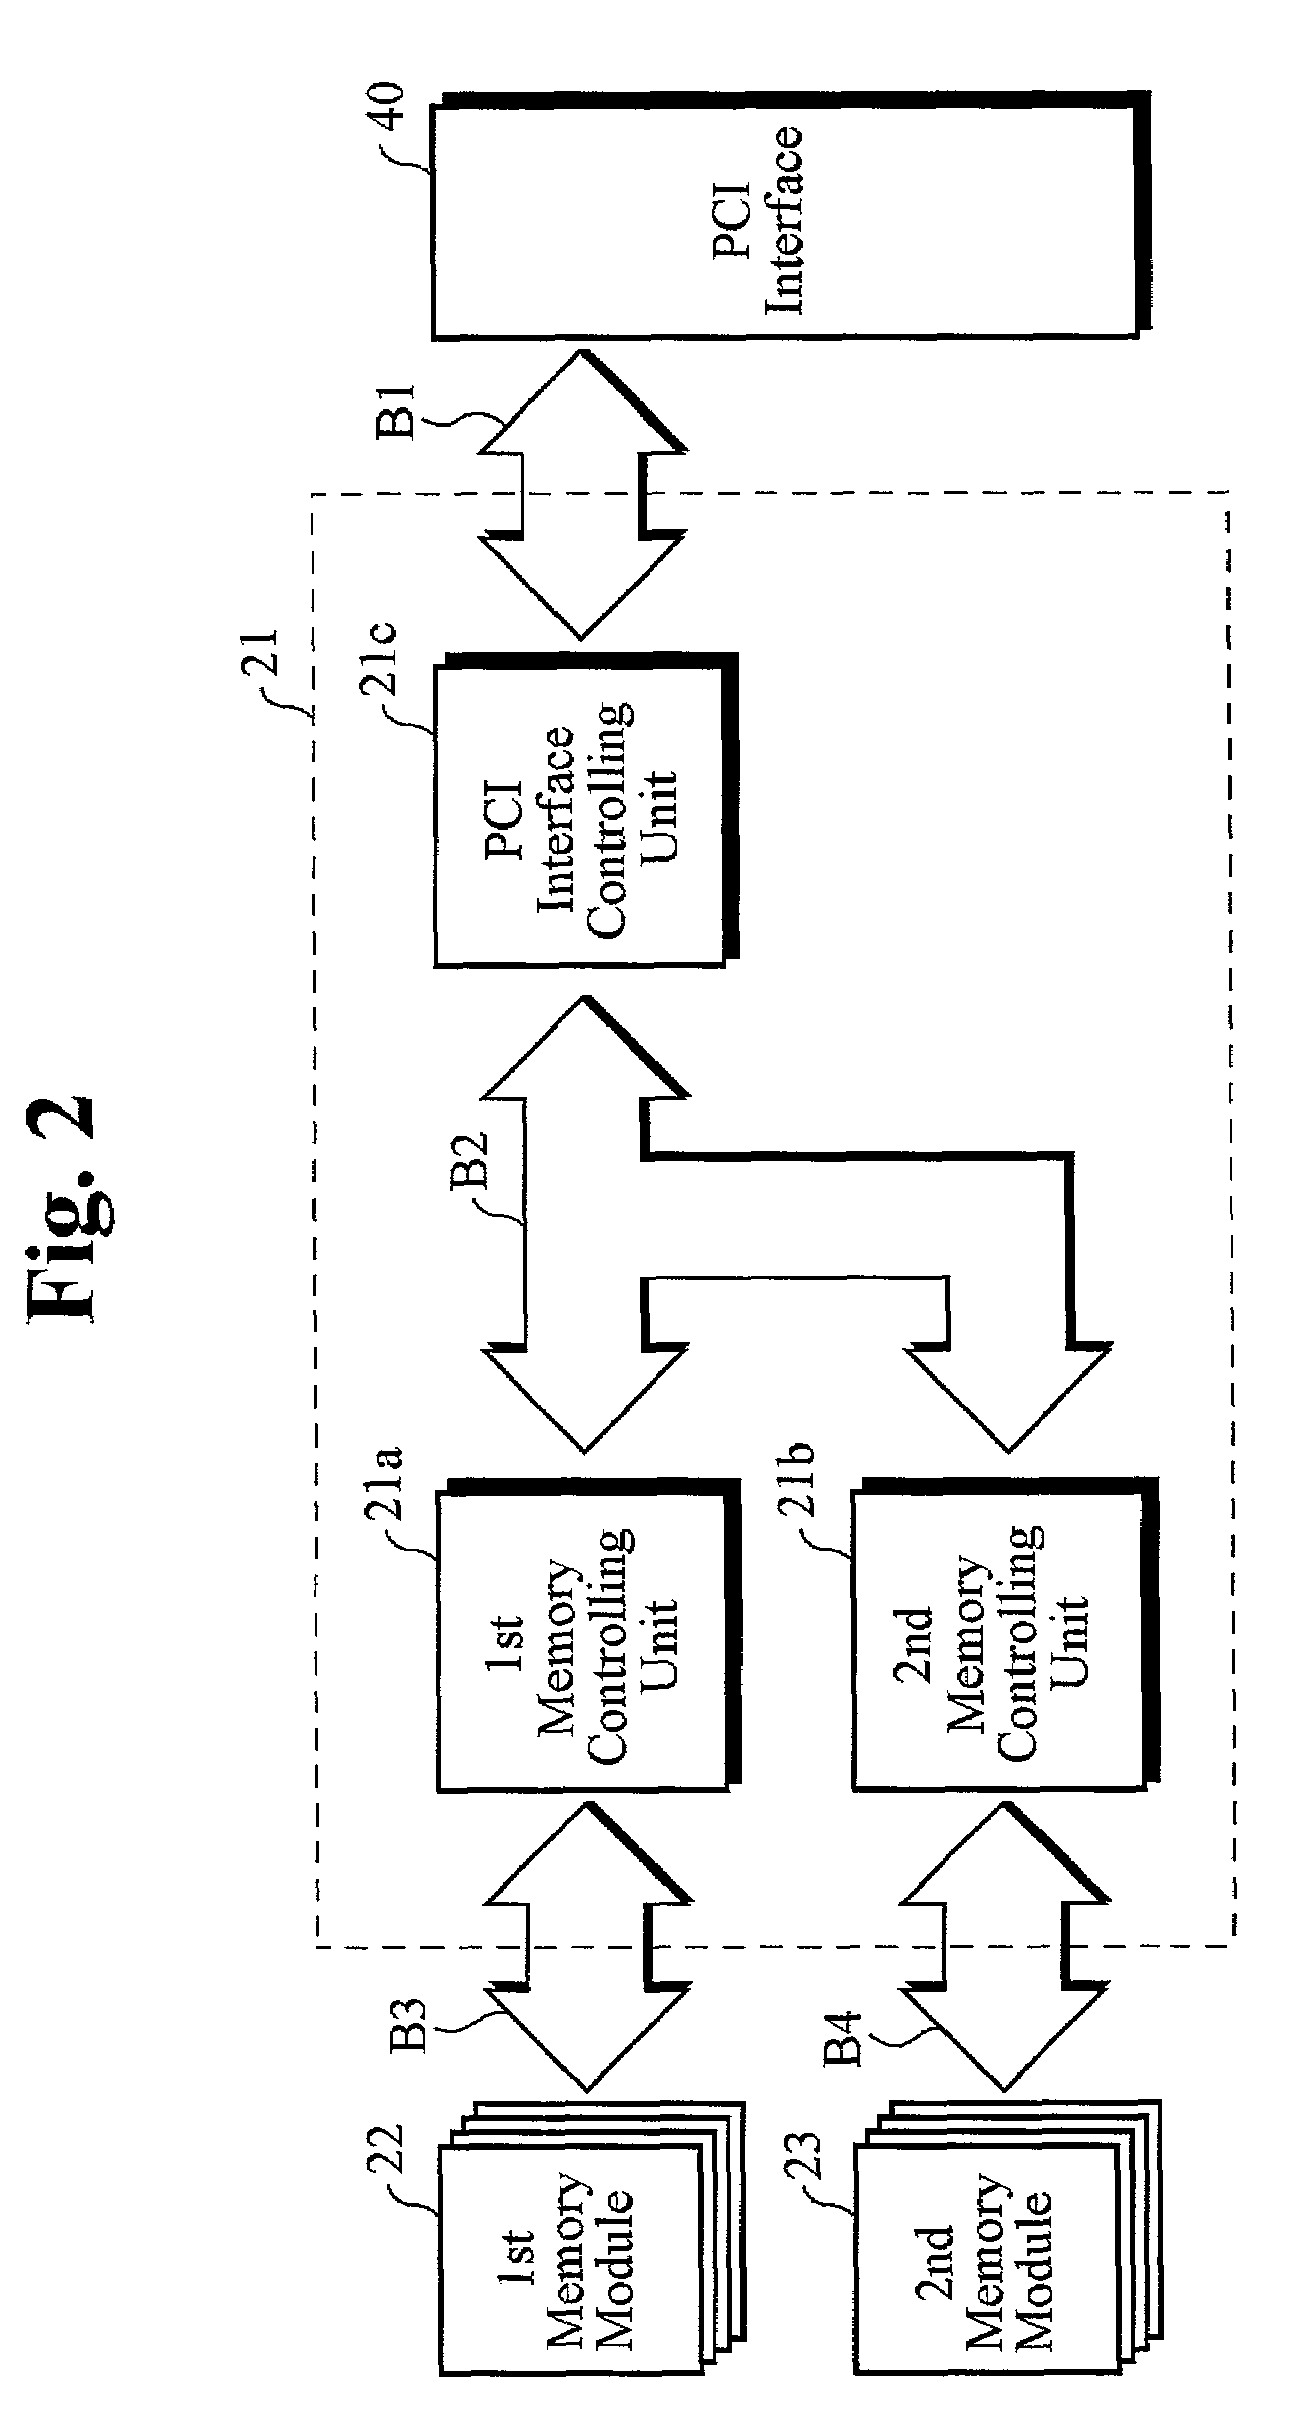 System for addressing a data storage unit used in a computer